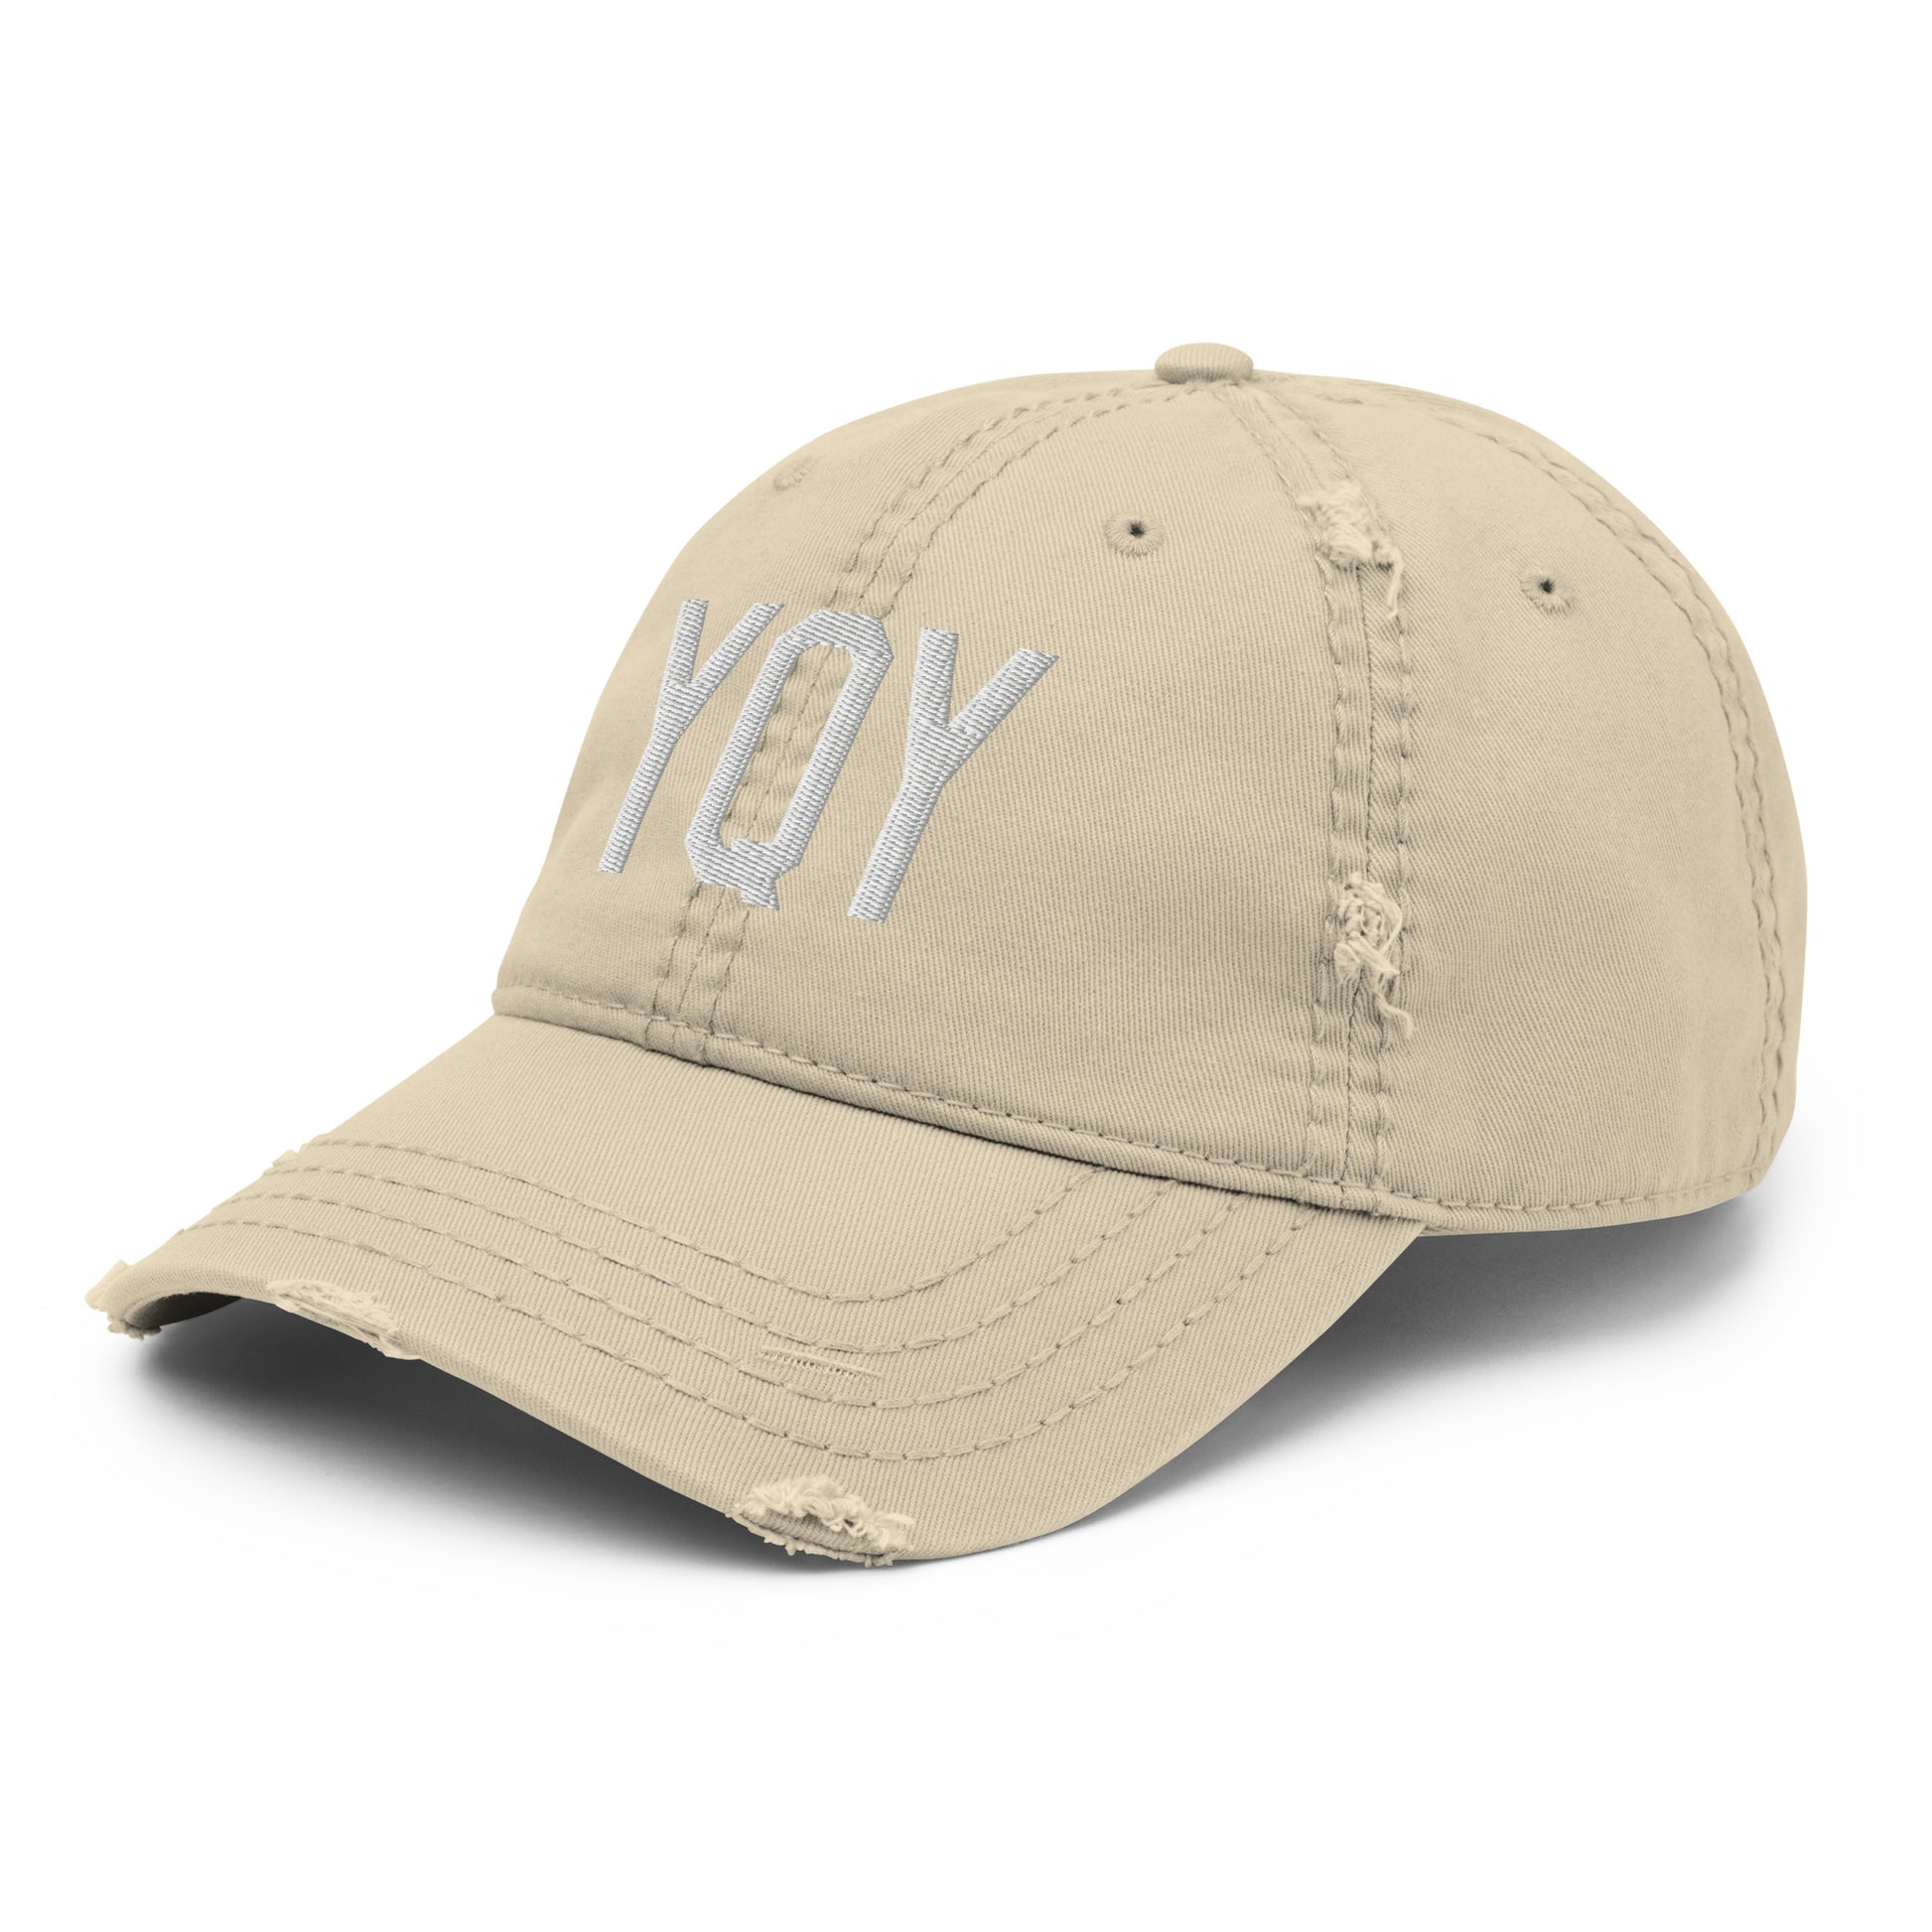 Airport Code Distressed Hat - White • YQY Sydney • YHM Designs - Image 19